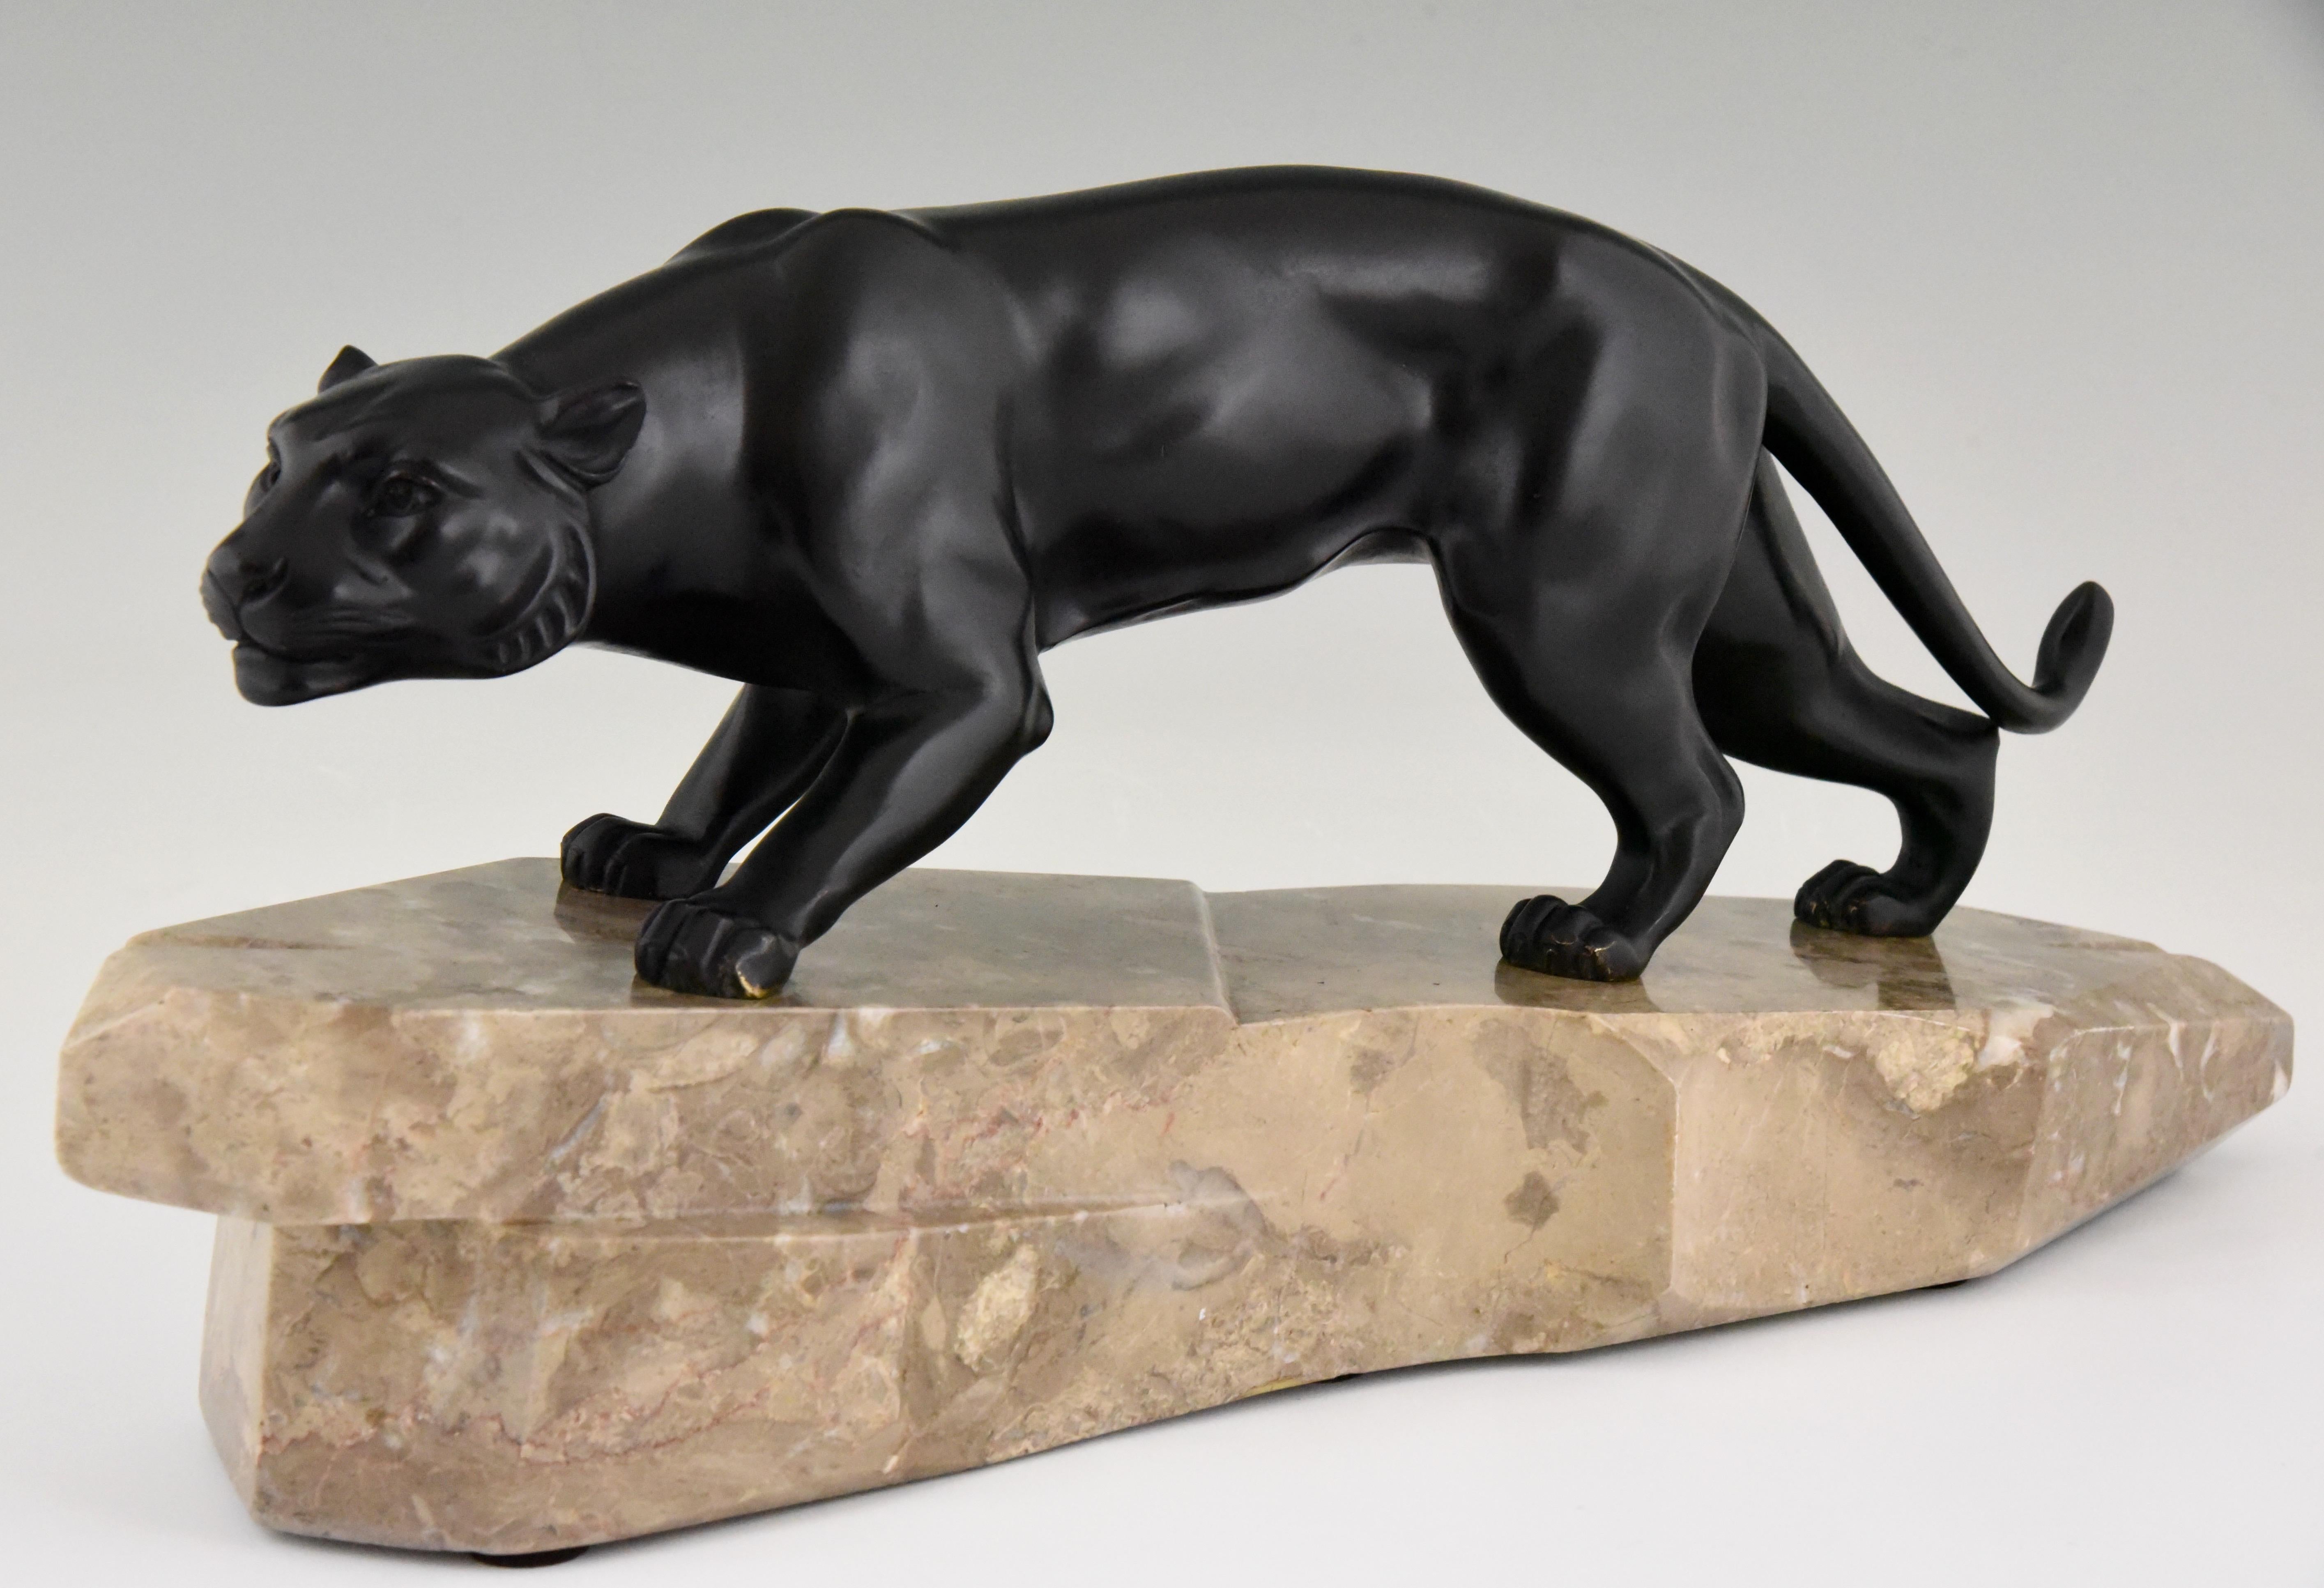 Typical Art Deco panther sculpture in patinated bronze on a marble base. The work is signed by J. Brault, cast in France, circa 1930.